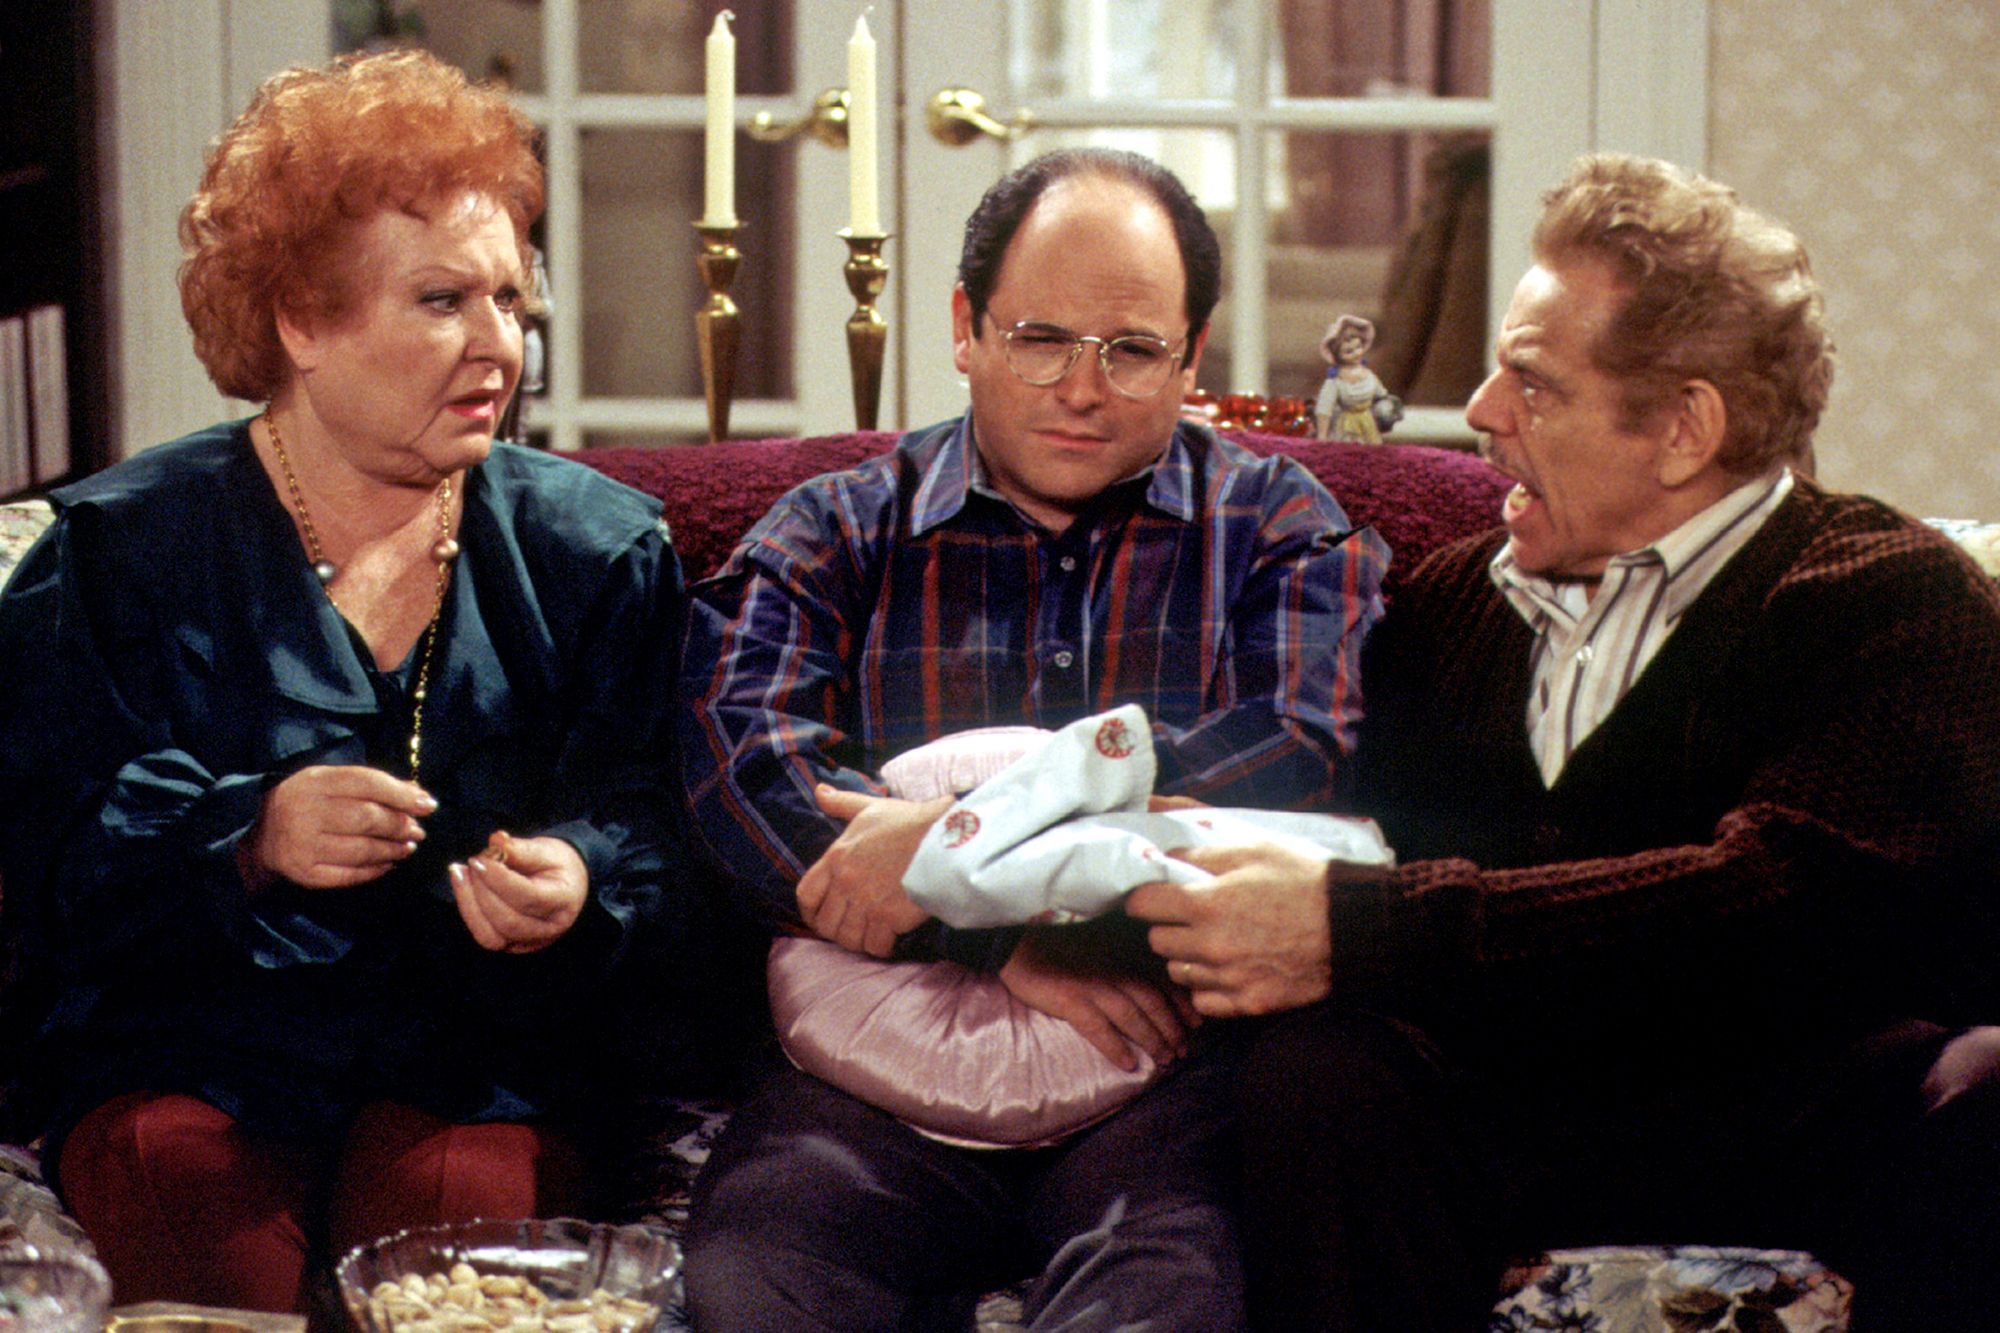 George and his parents sitting in their living room, George, seemingly unhappy as usual in Seinfeld.